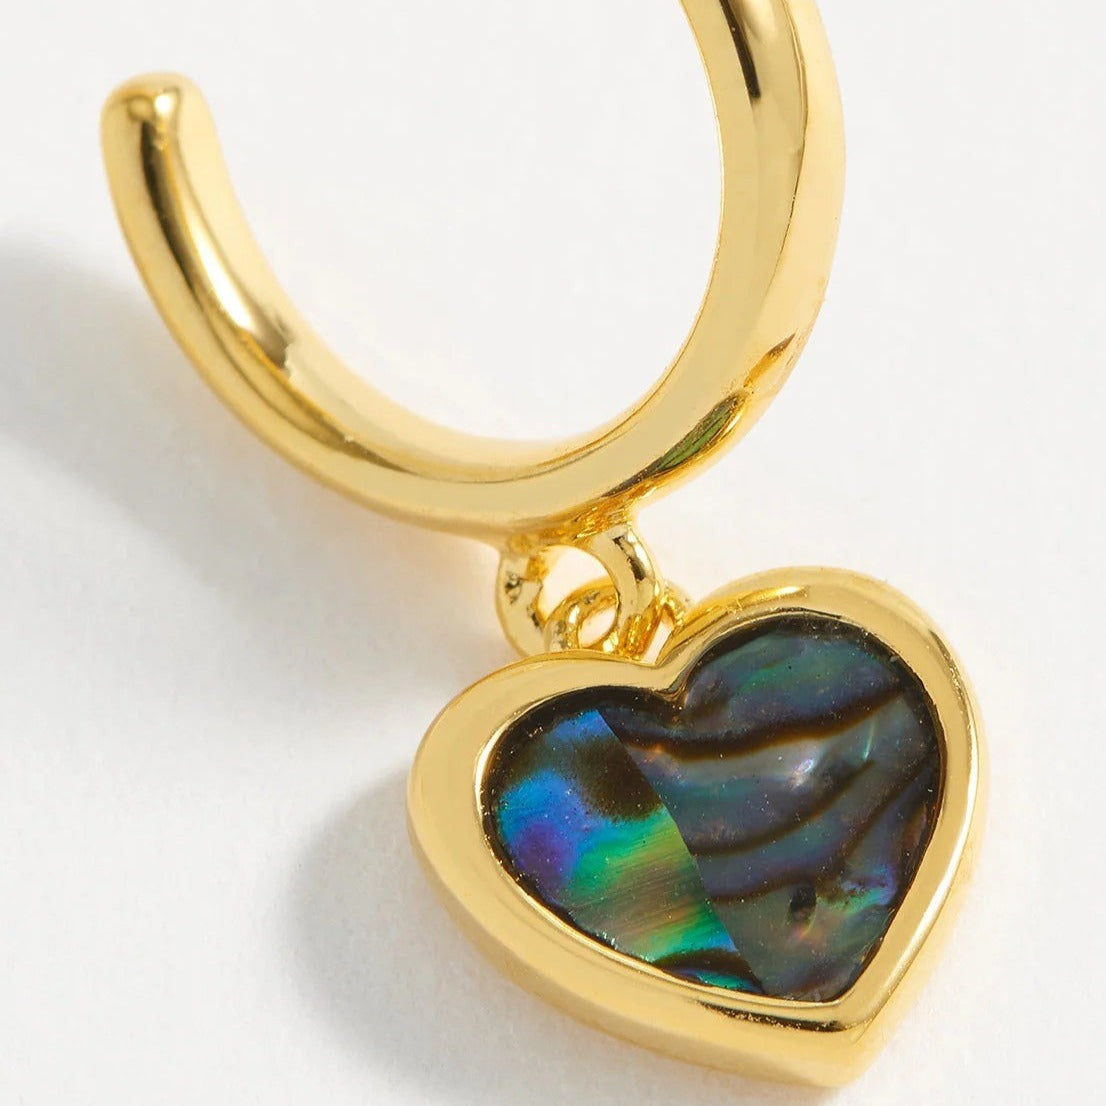 Abalone Heart Drop Hoops - Gold Plated